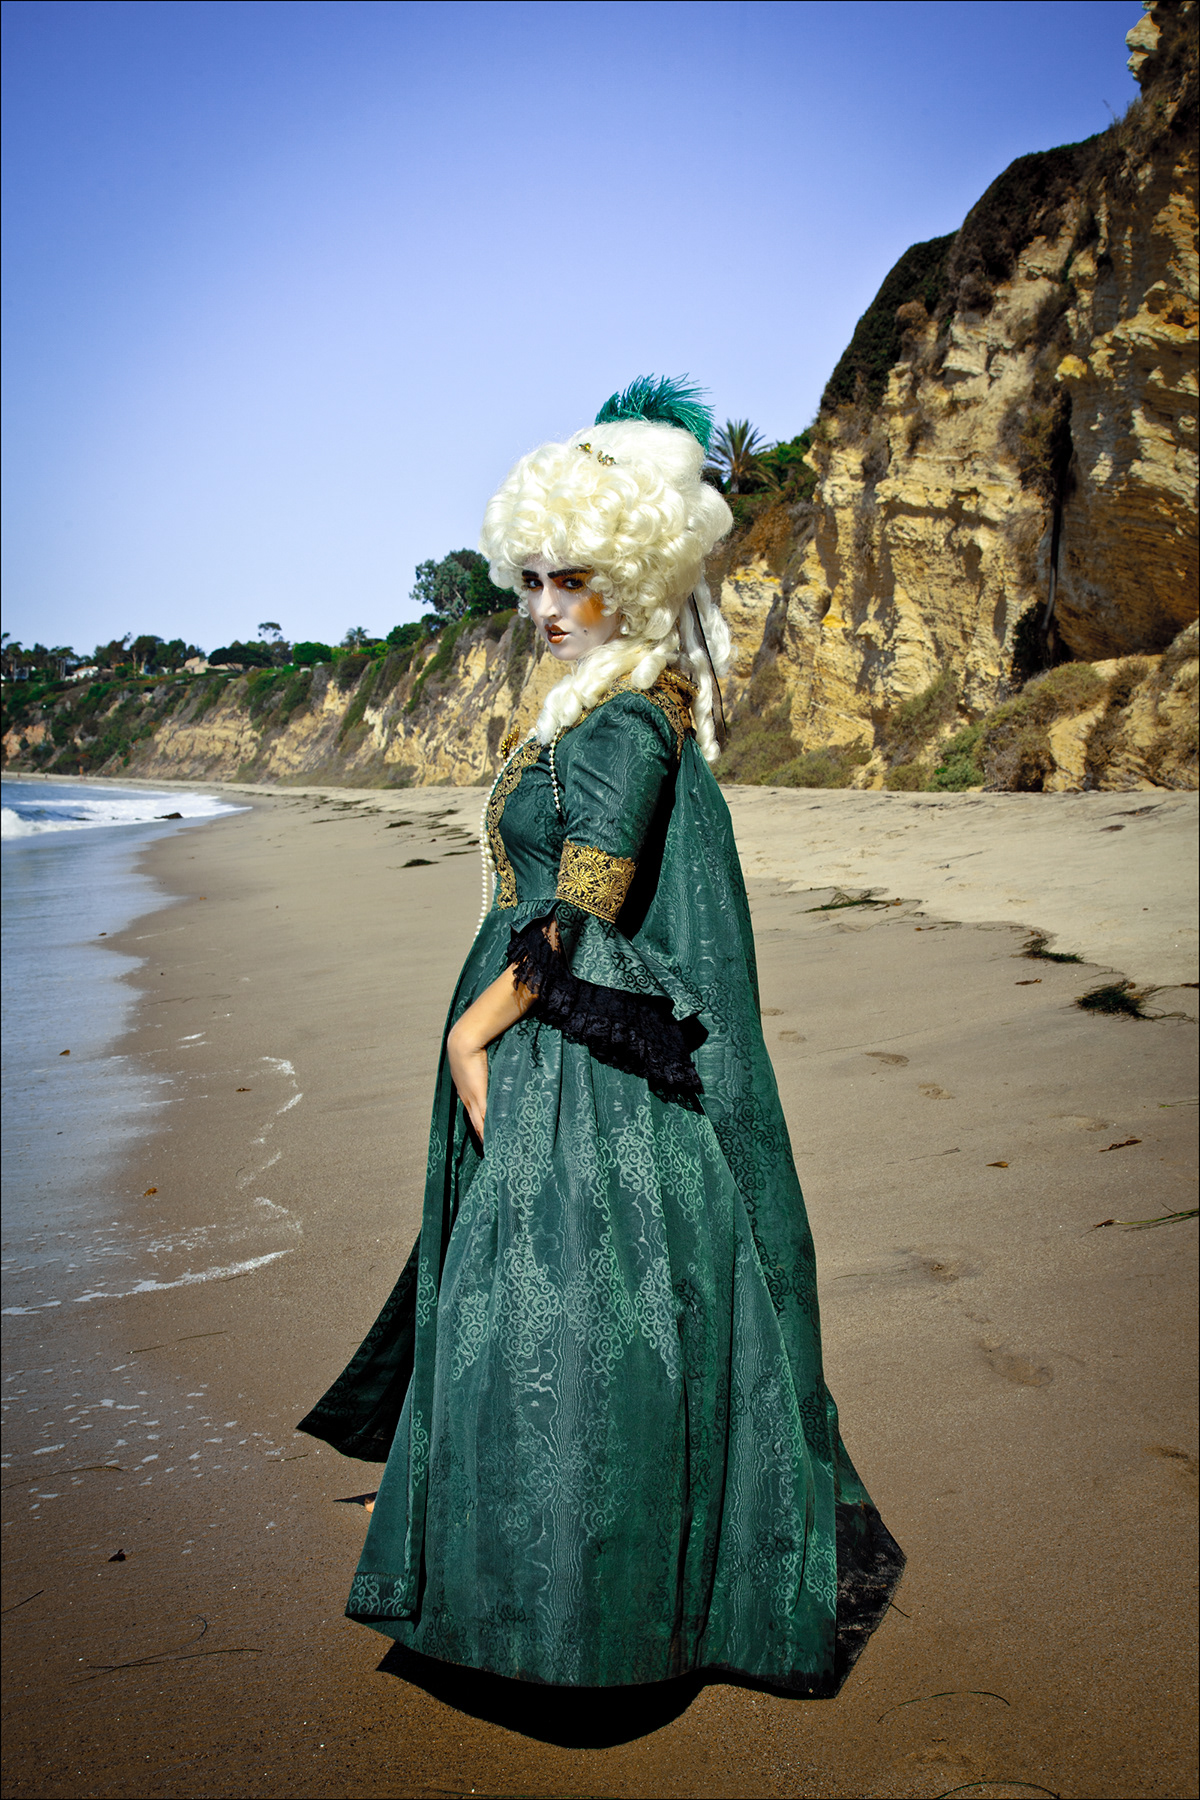 marie antoinette 18th century beach  nature period historical hair texture light location costume pattern Fashion  makeup green